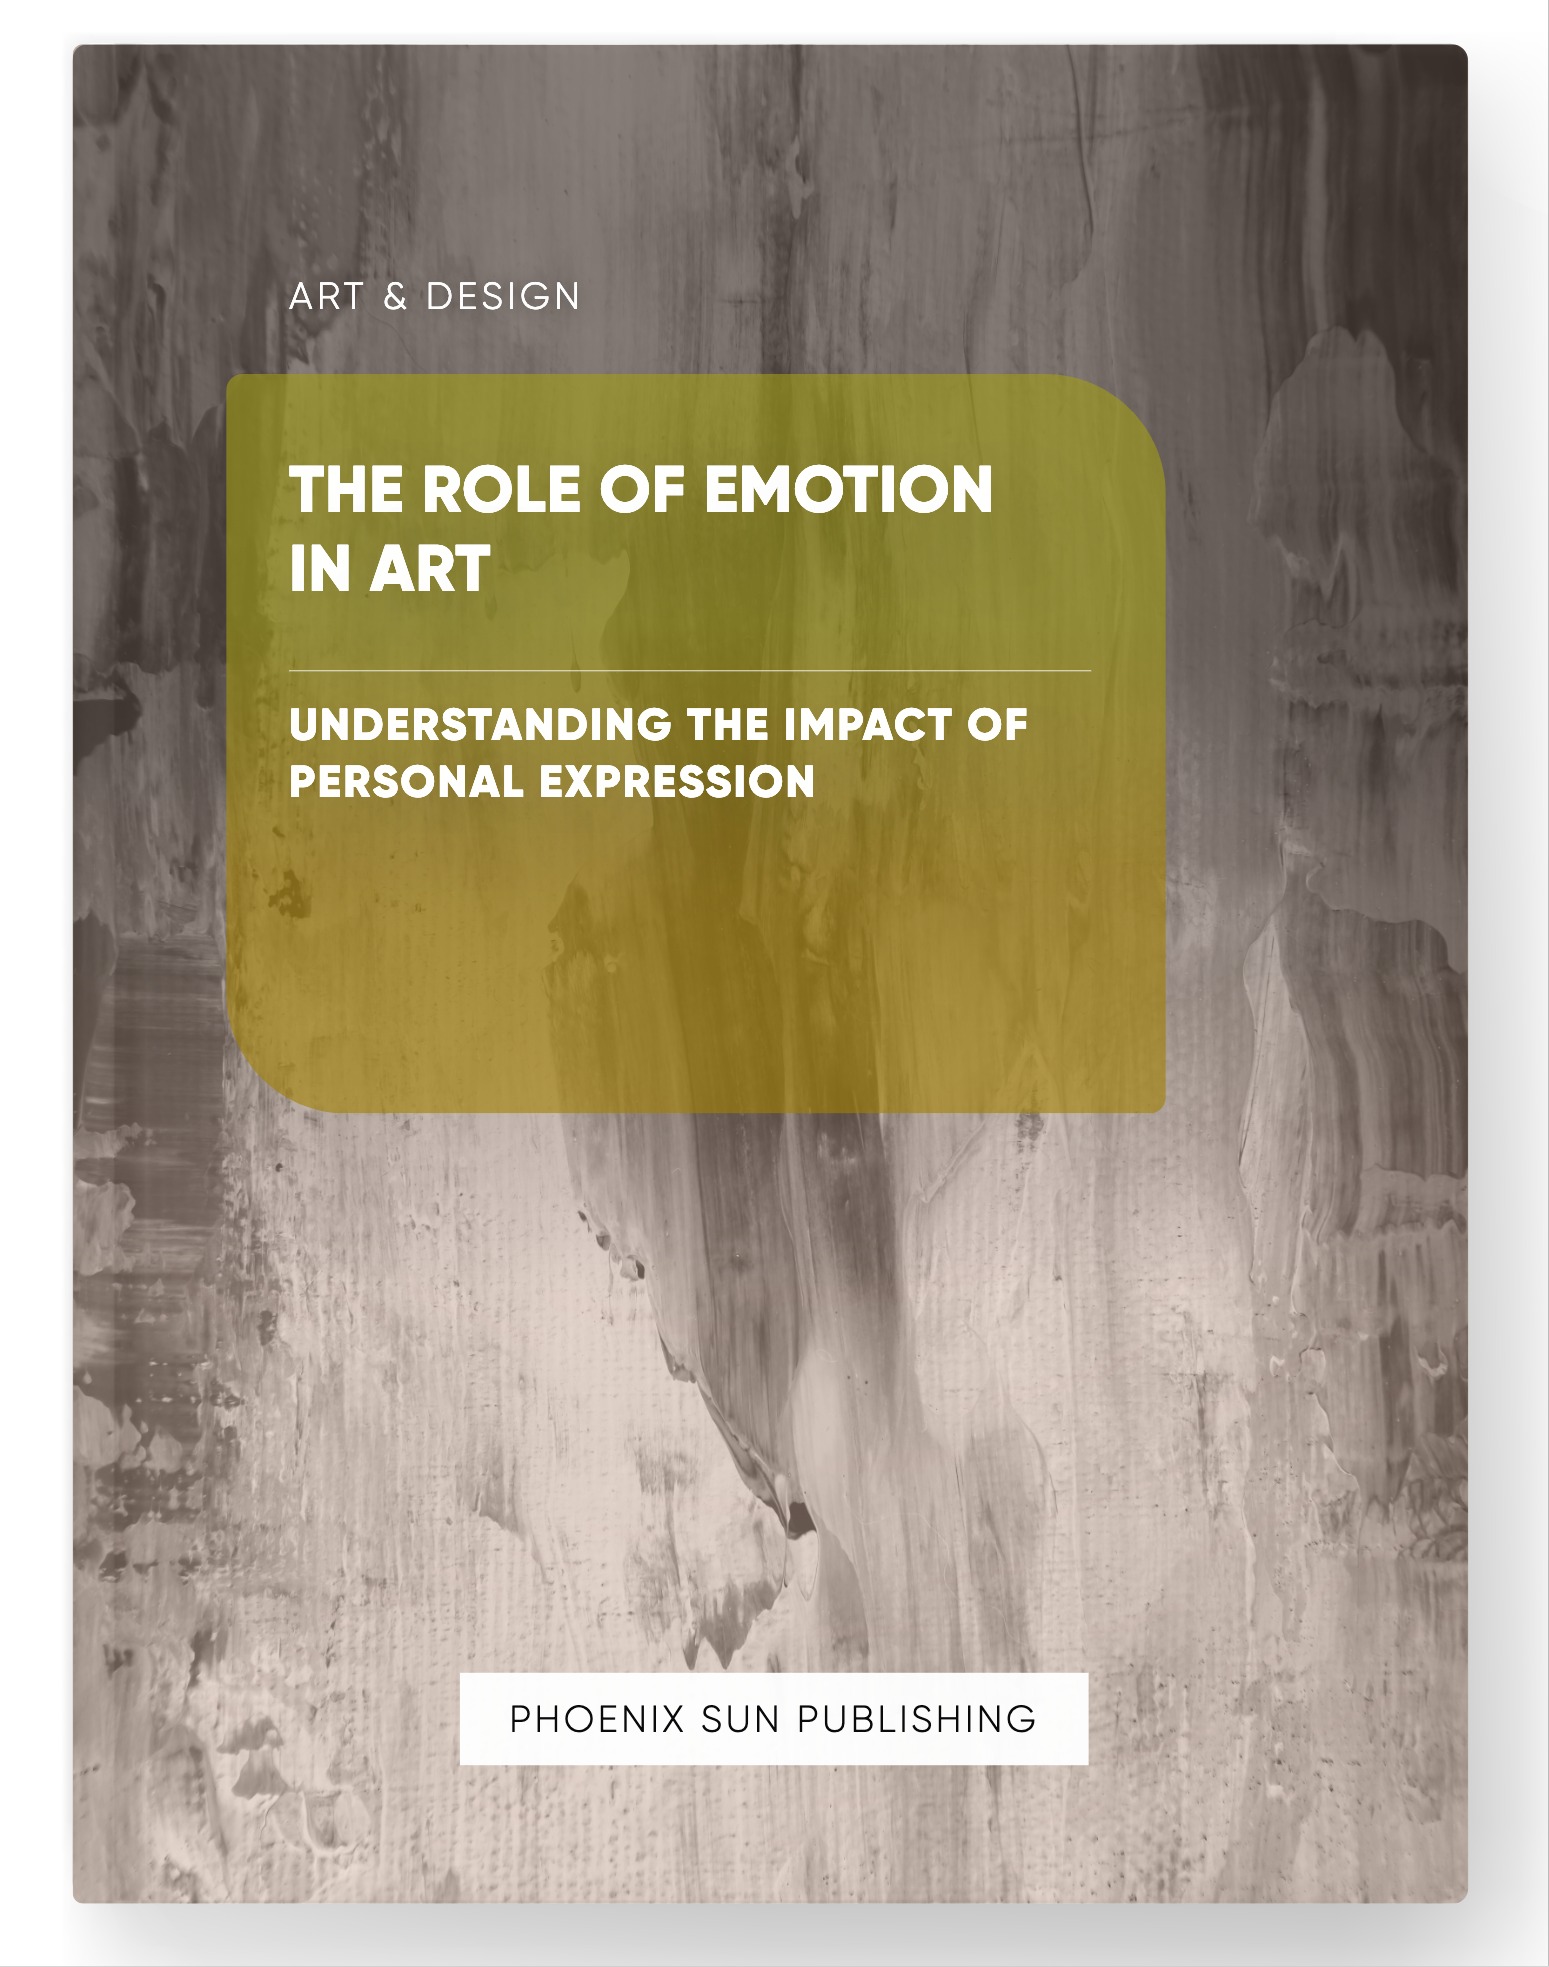 The Role of Emotion in Art – Understanding the Impact of Personal Expression